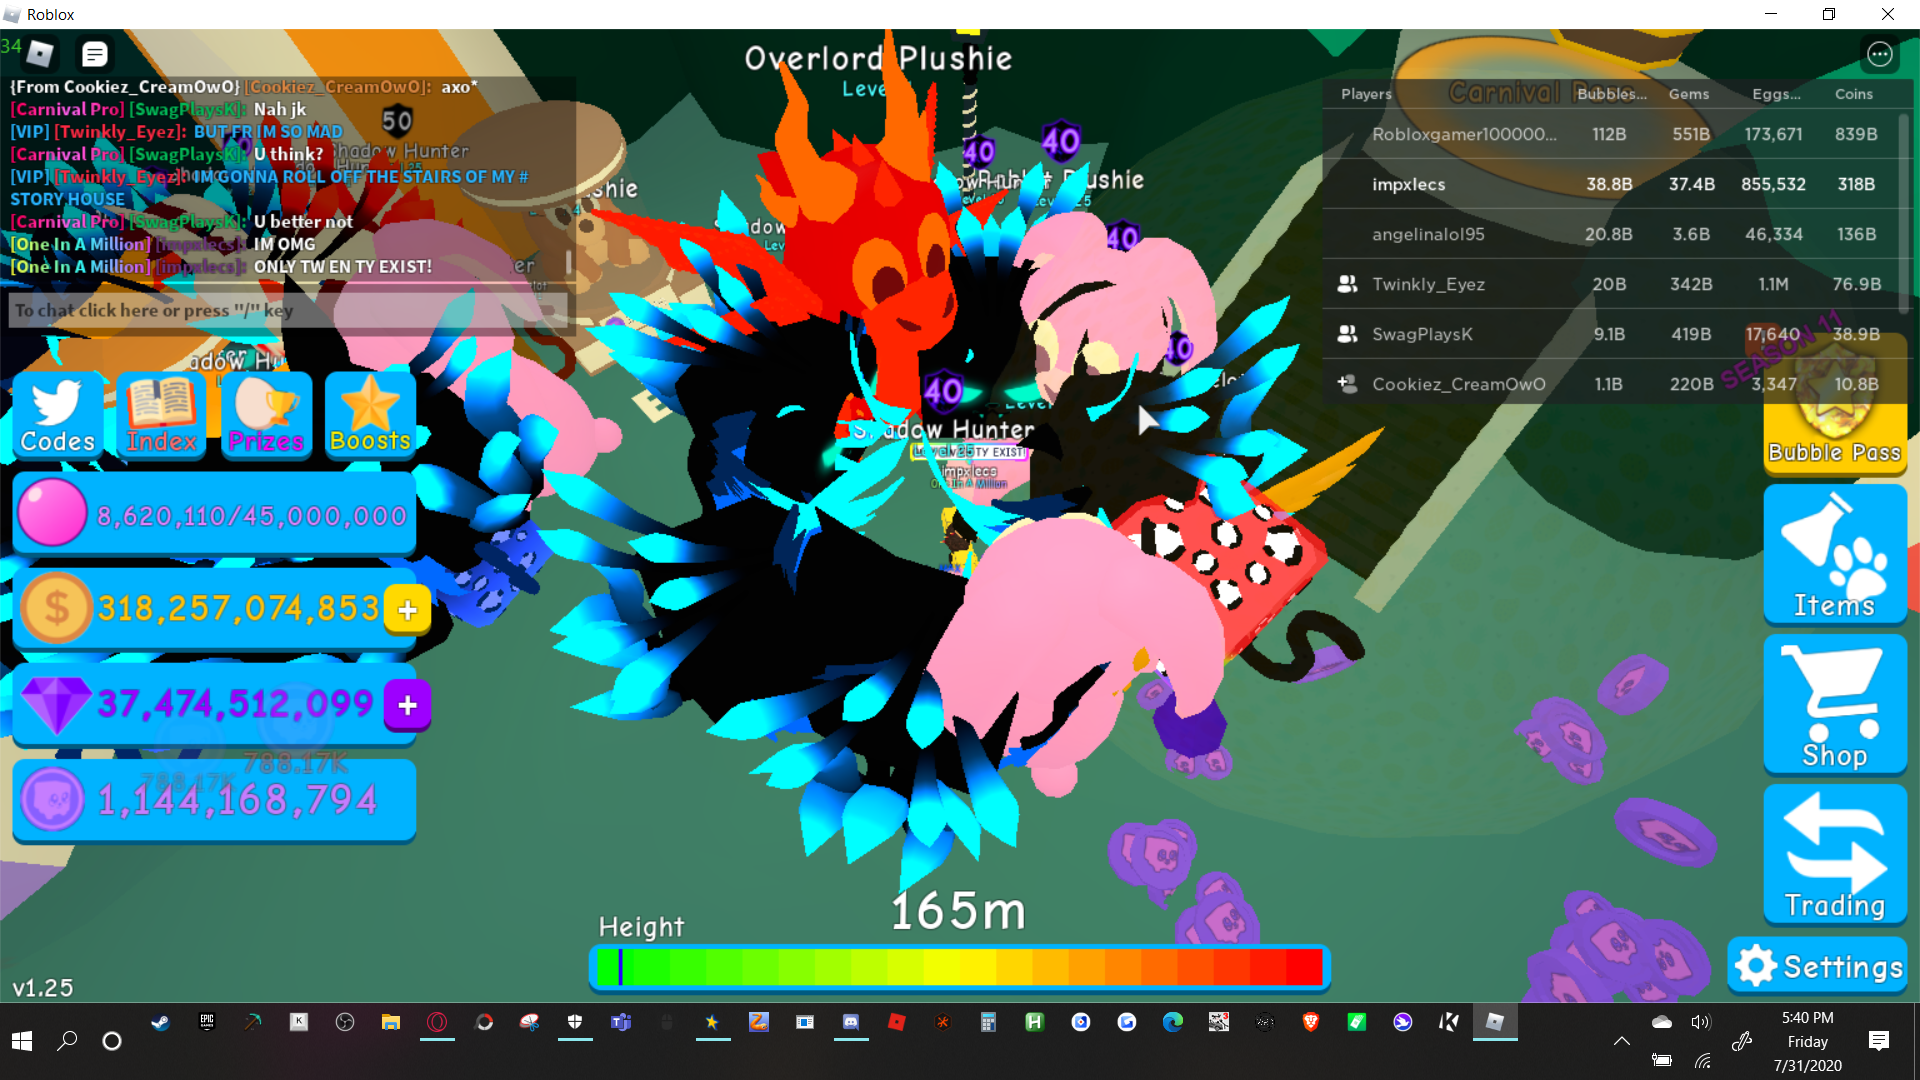 Guys Omg I Just Hatched It The Overlord Plushie Fandom - omg guys this is my first 2 robux omg omg omg omg